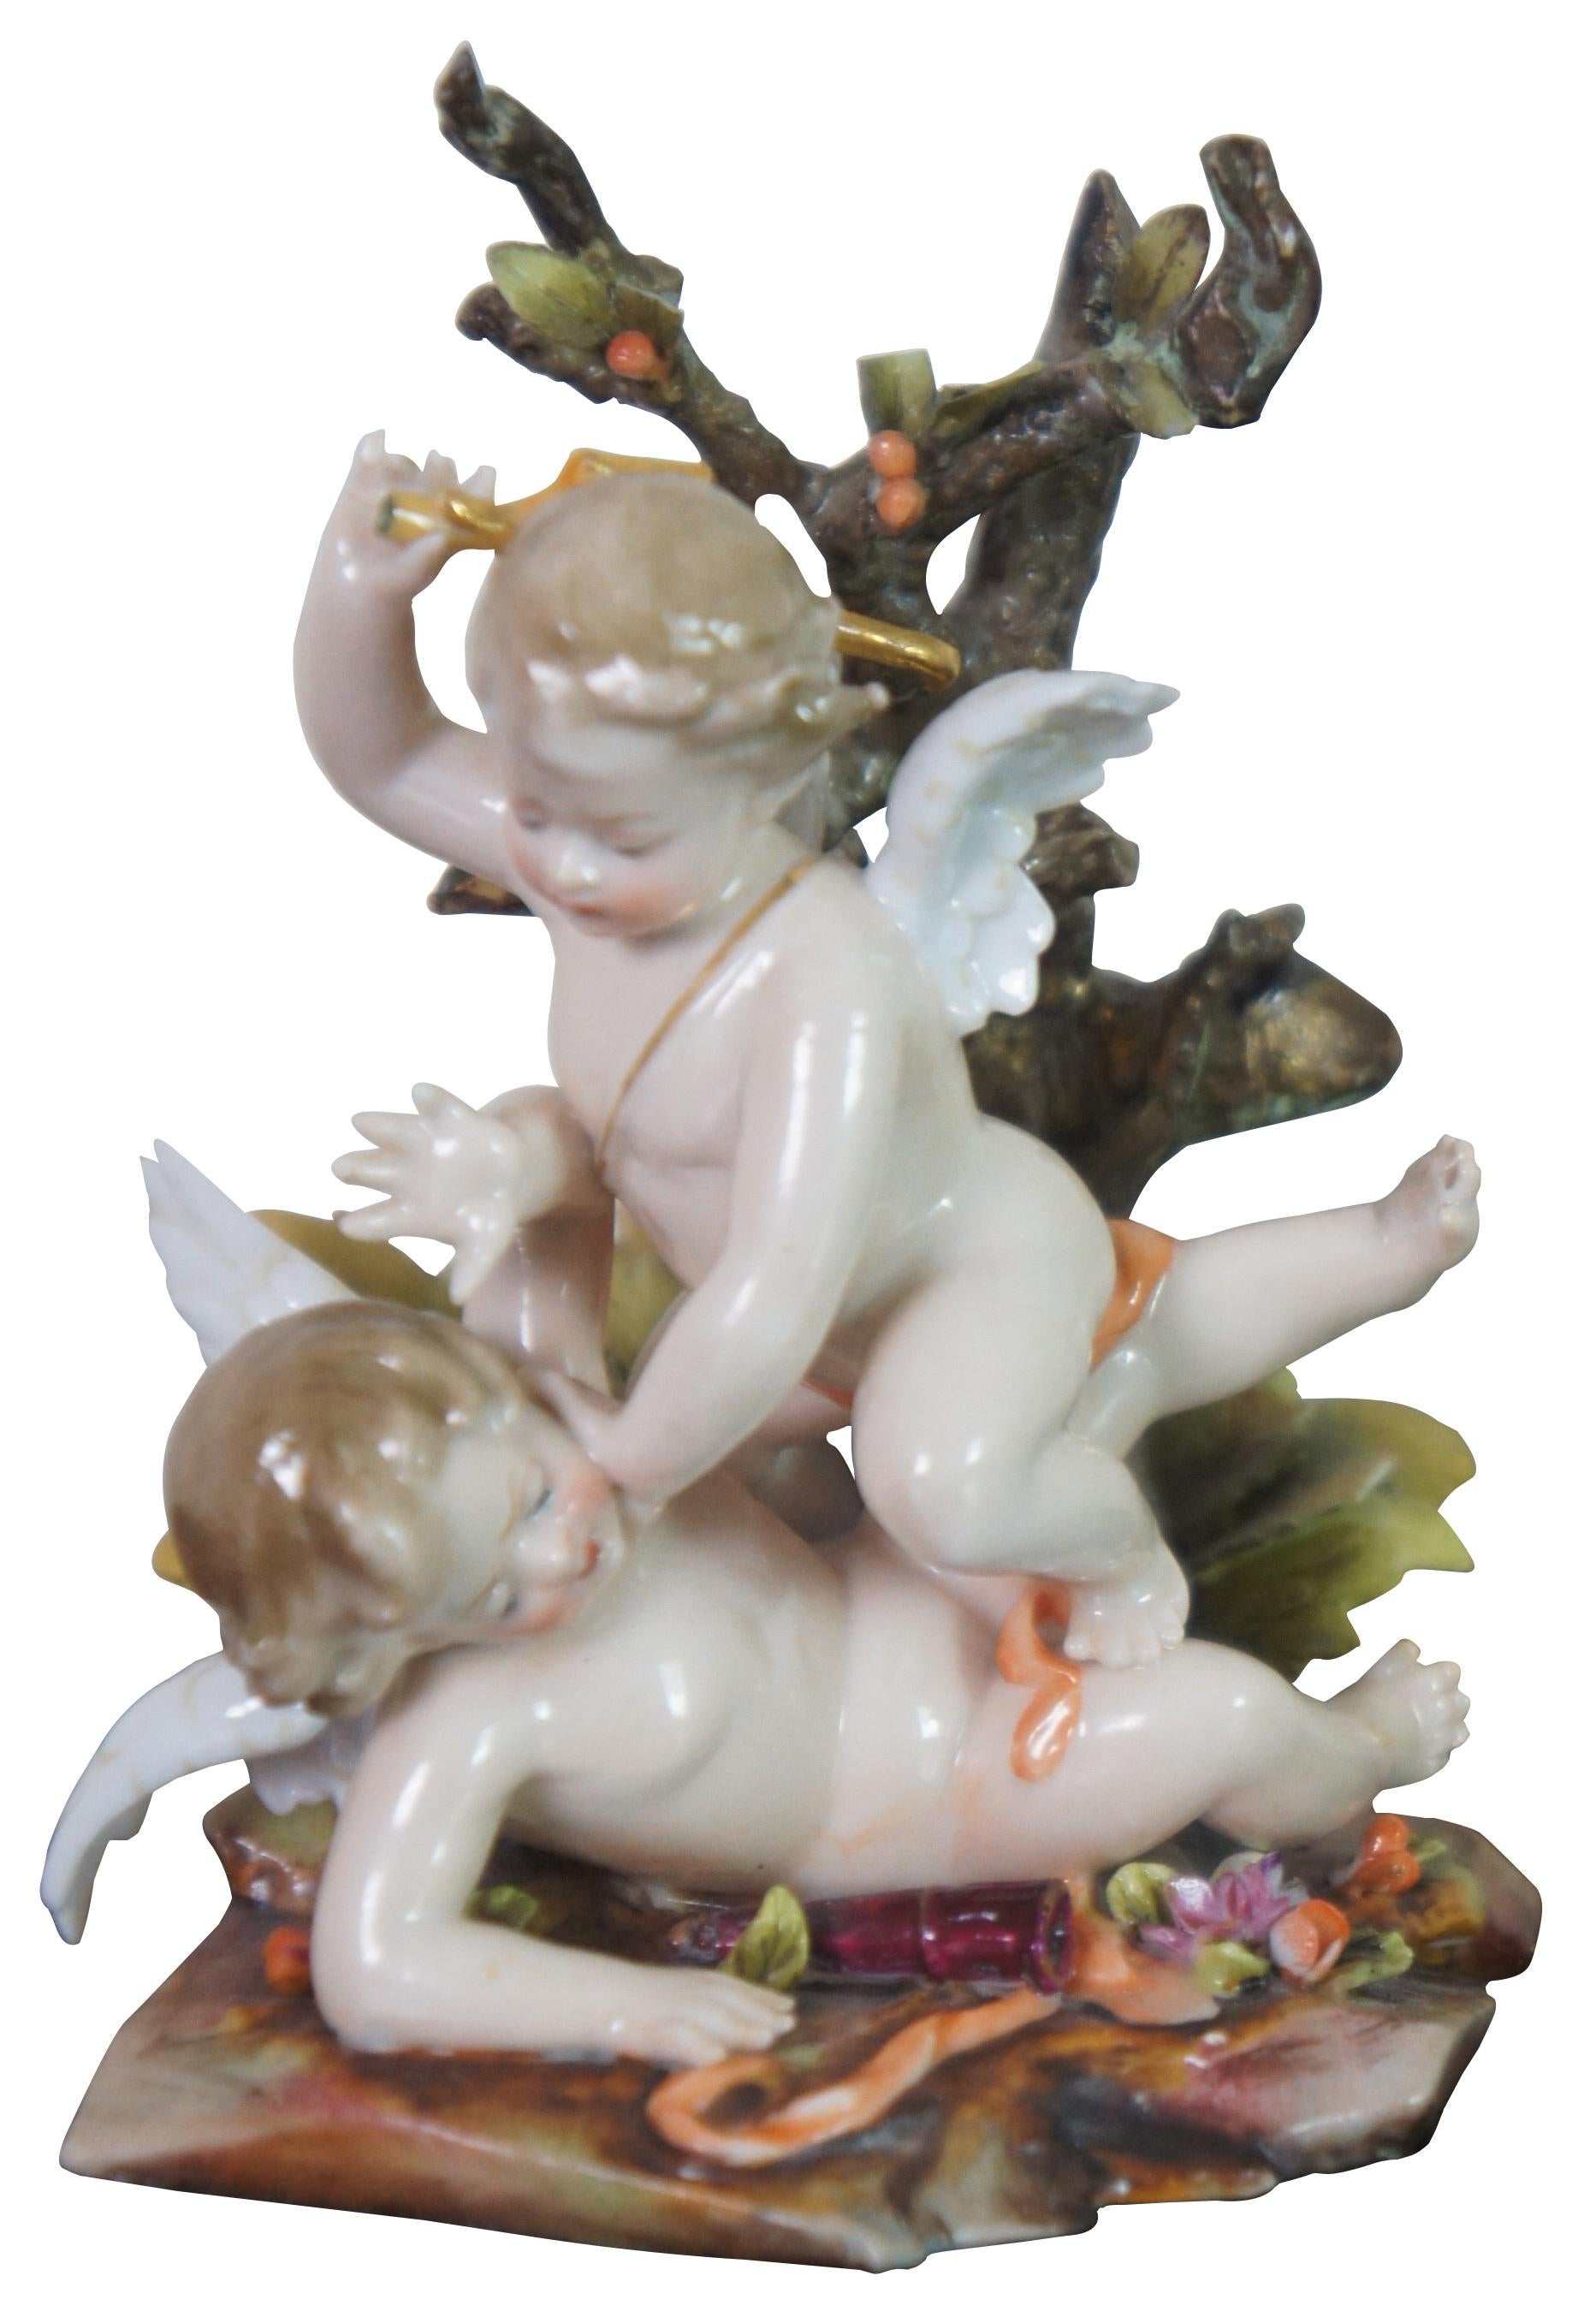 Pair of two rare early 20th century German Volkstedter porcelain figurines showing pairs of cherubs / angels / putti / cupids tumbling among rocks and trees, made by Richard Eckert in Volkstedt around 1905. This factory was affiliated to the oldest